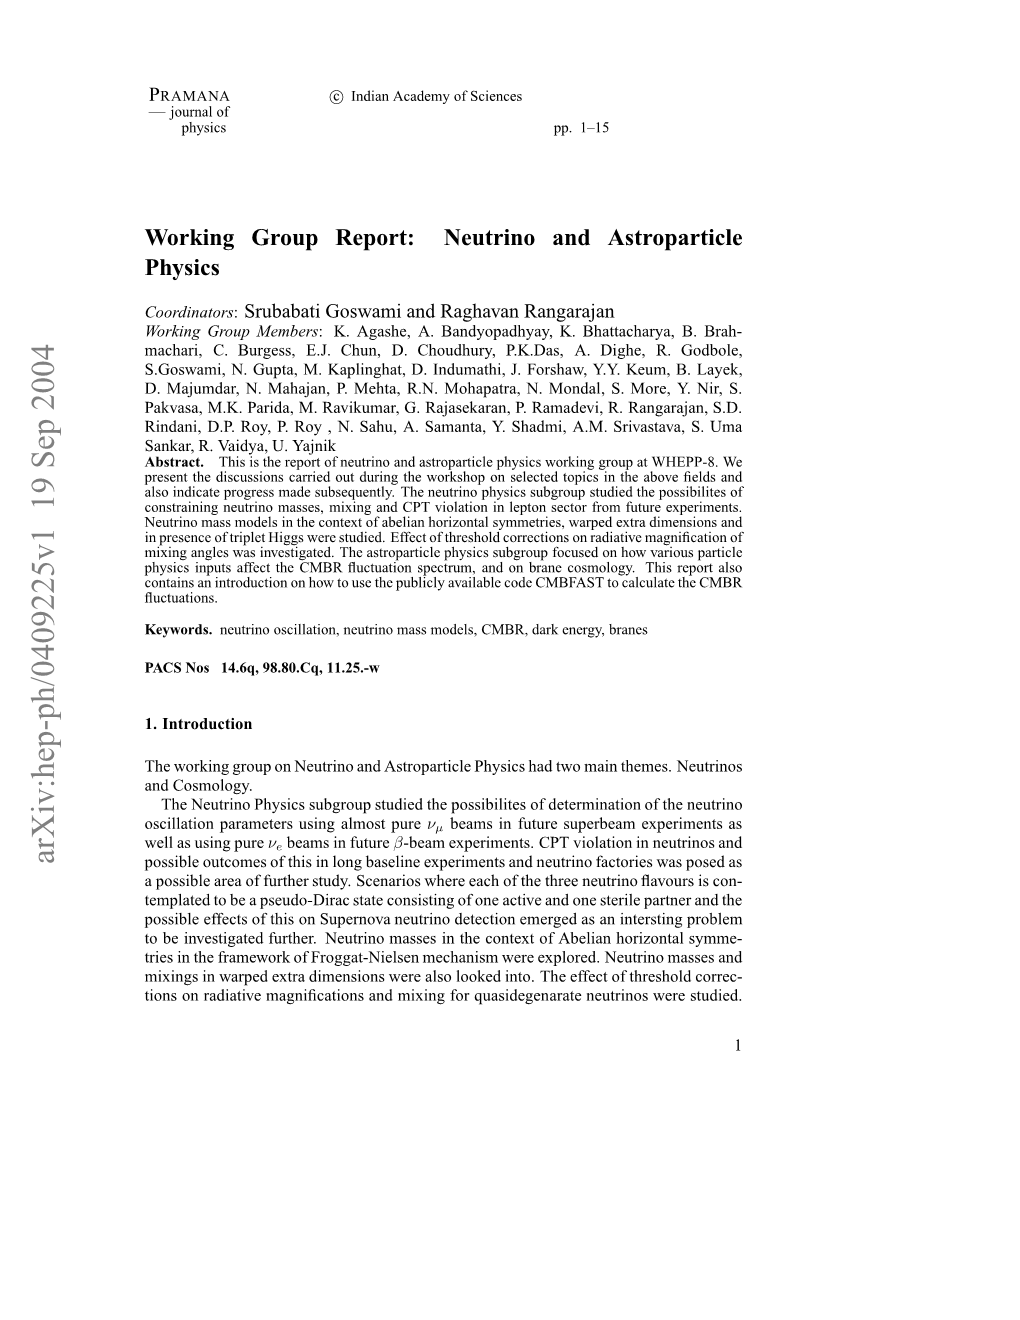 Working Group Report: Neutrino and Astroparticle Physics